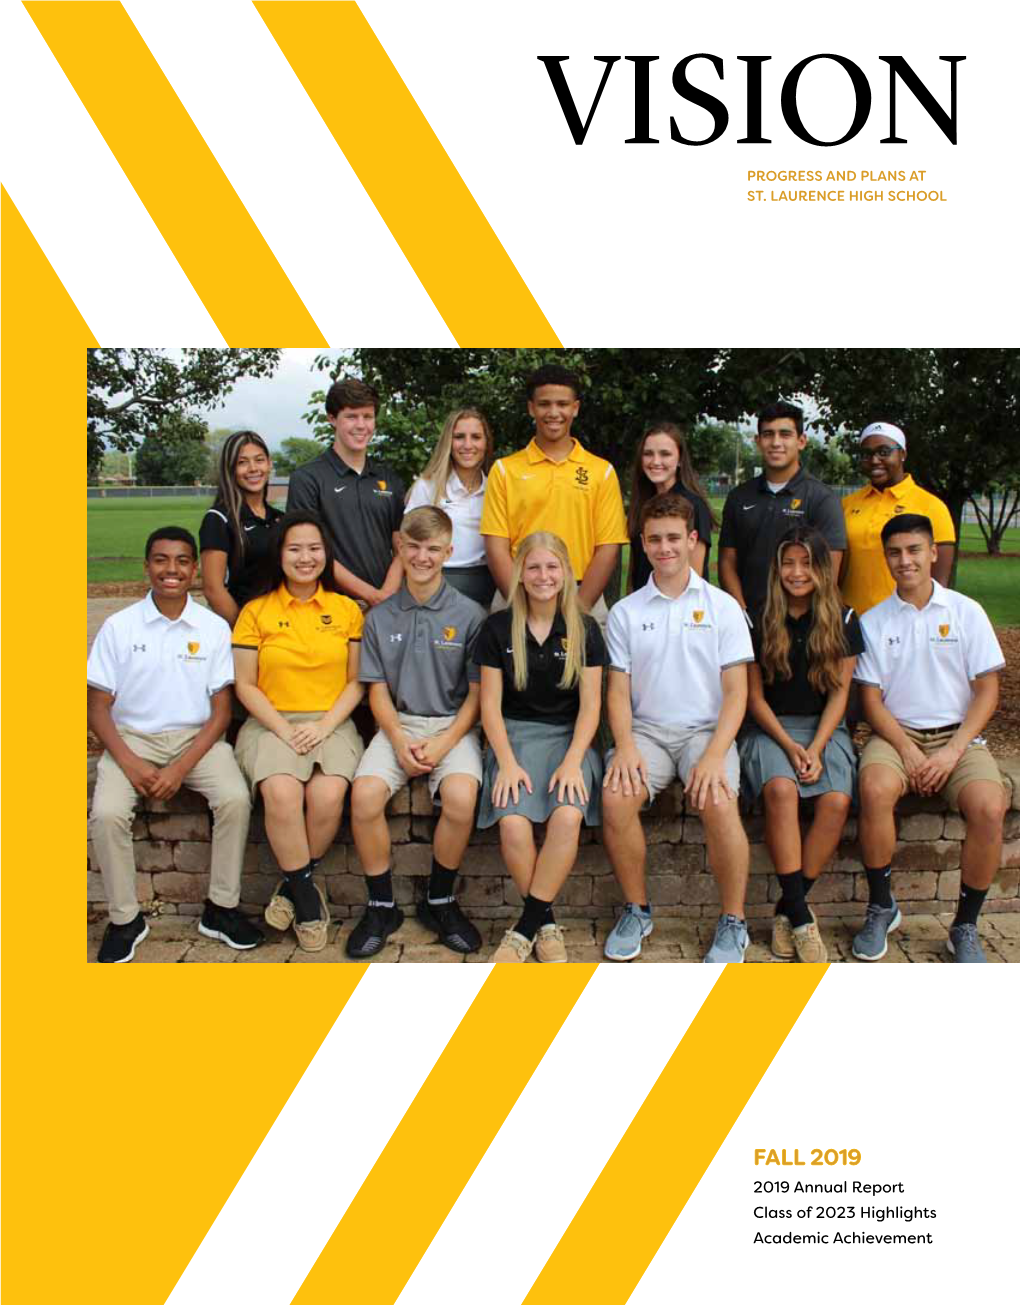 Fall 2019 2019 Annual Report Class of 2023 Highlights Academic Achievement Letter from the President Support the Tradition of Excellence with a Gift to St